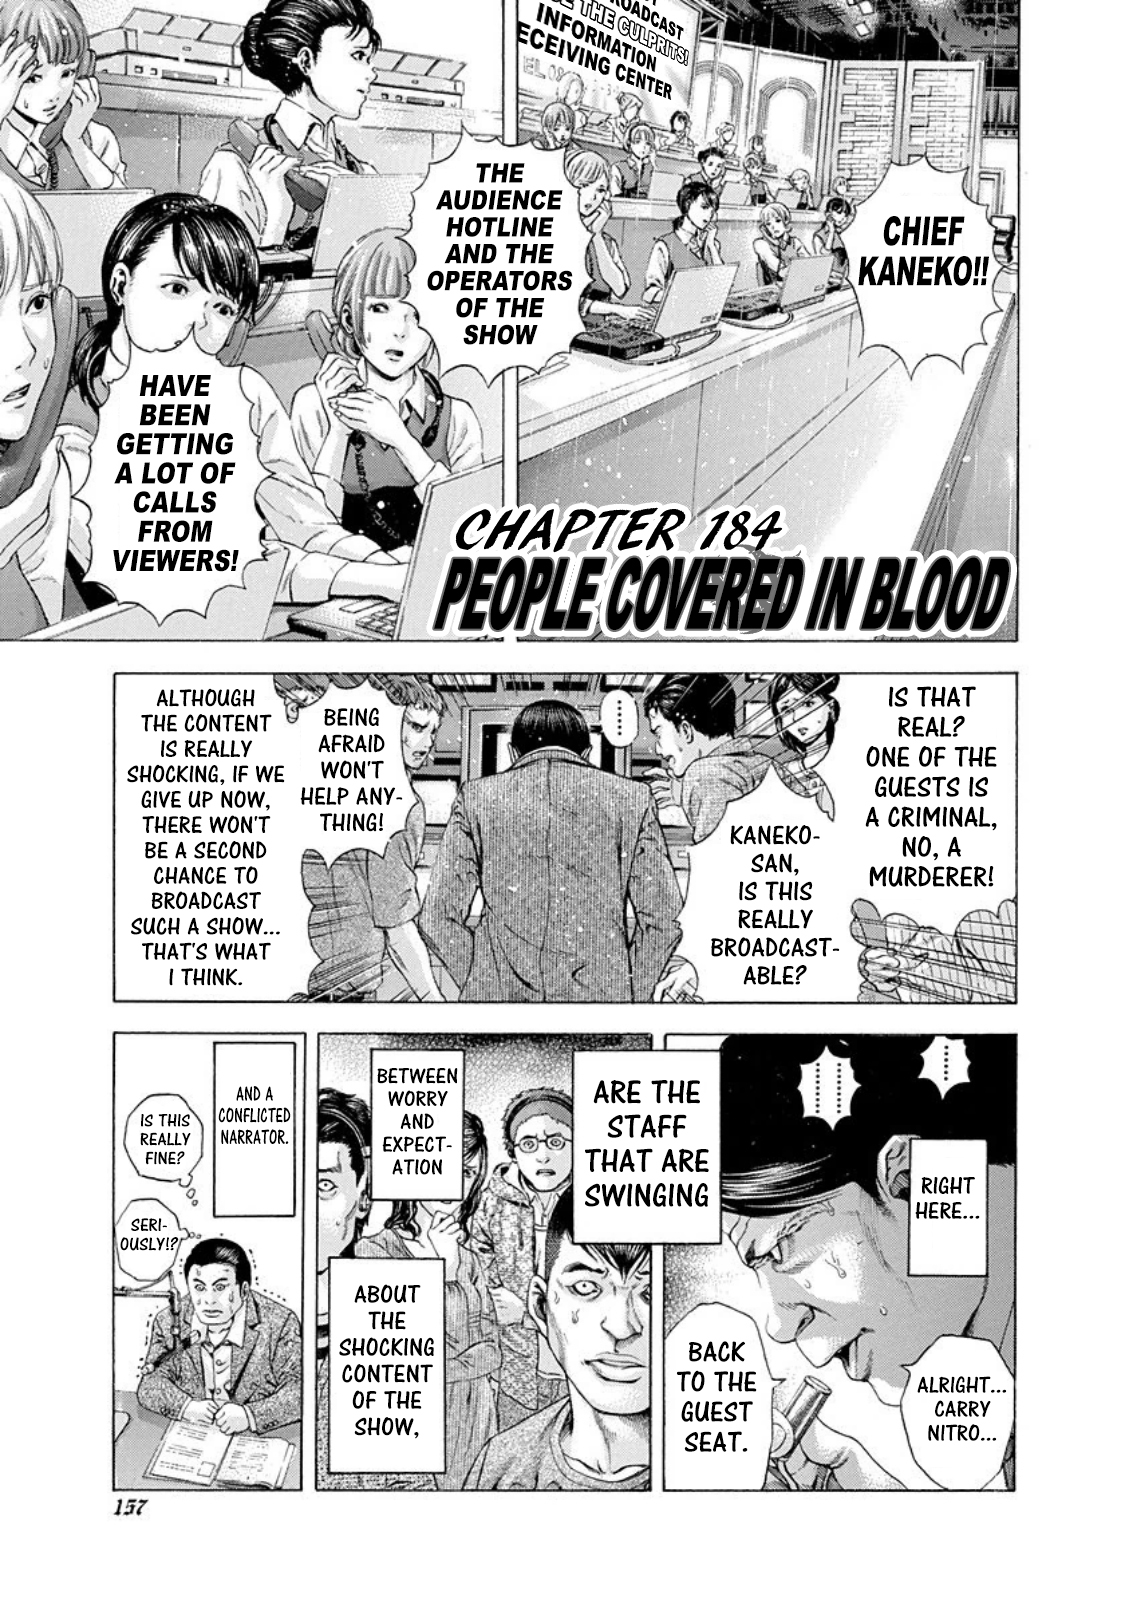 Usogui Vol. 17 Ch. 184 People Covered In Blood